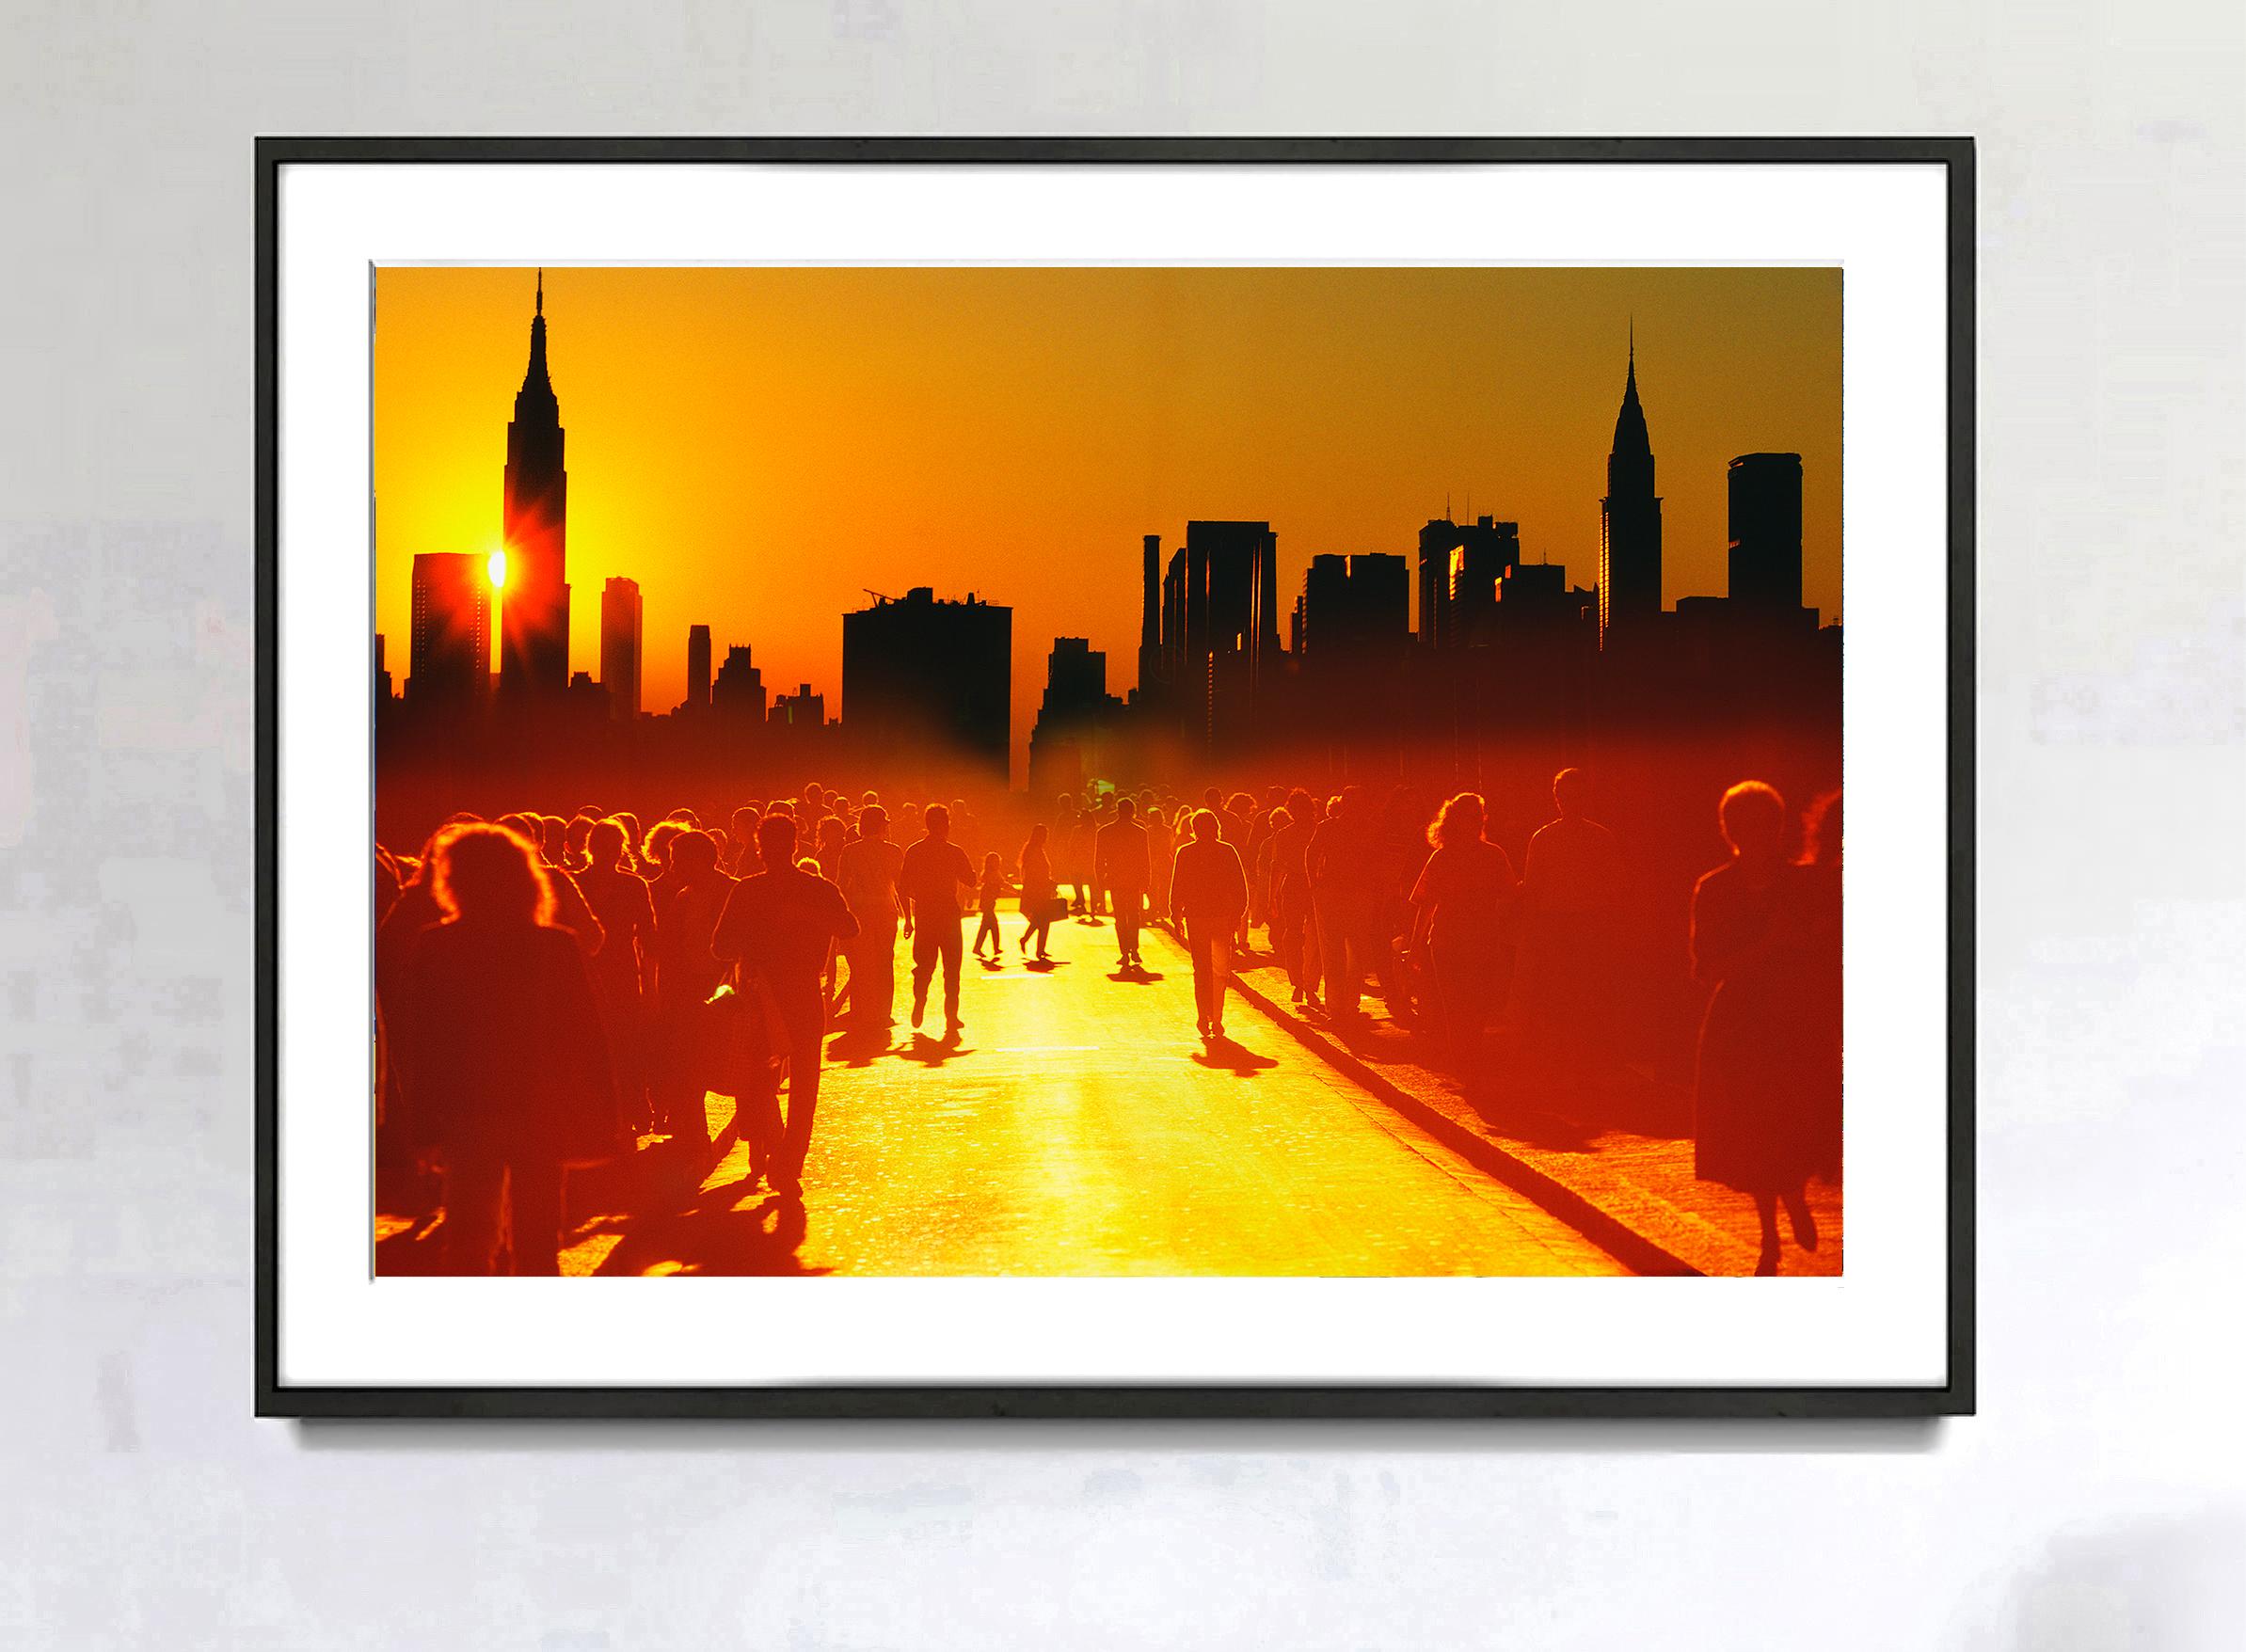 Sci Fi Close Encounters with Orange New York City - Photograph by Mitchell Funk